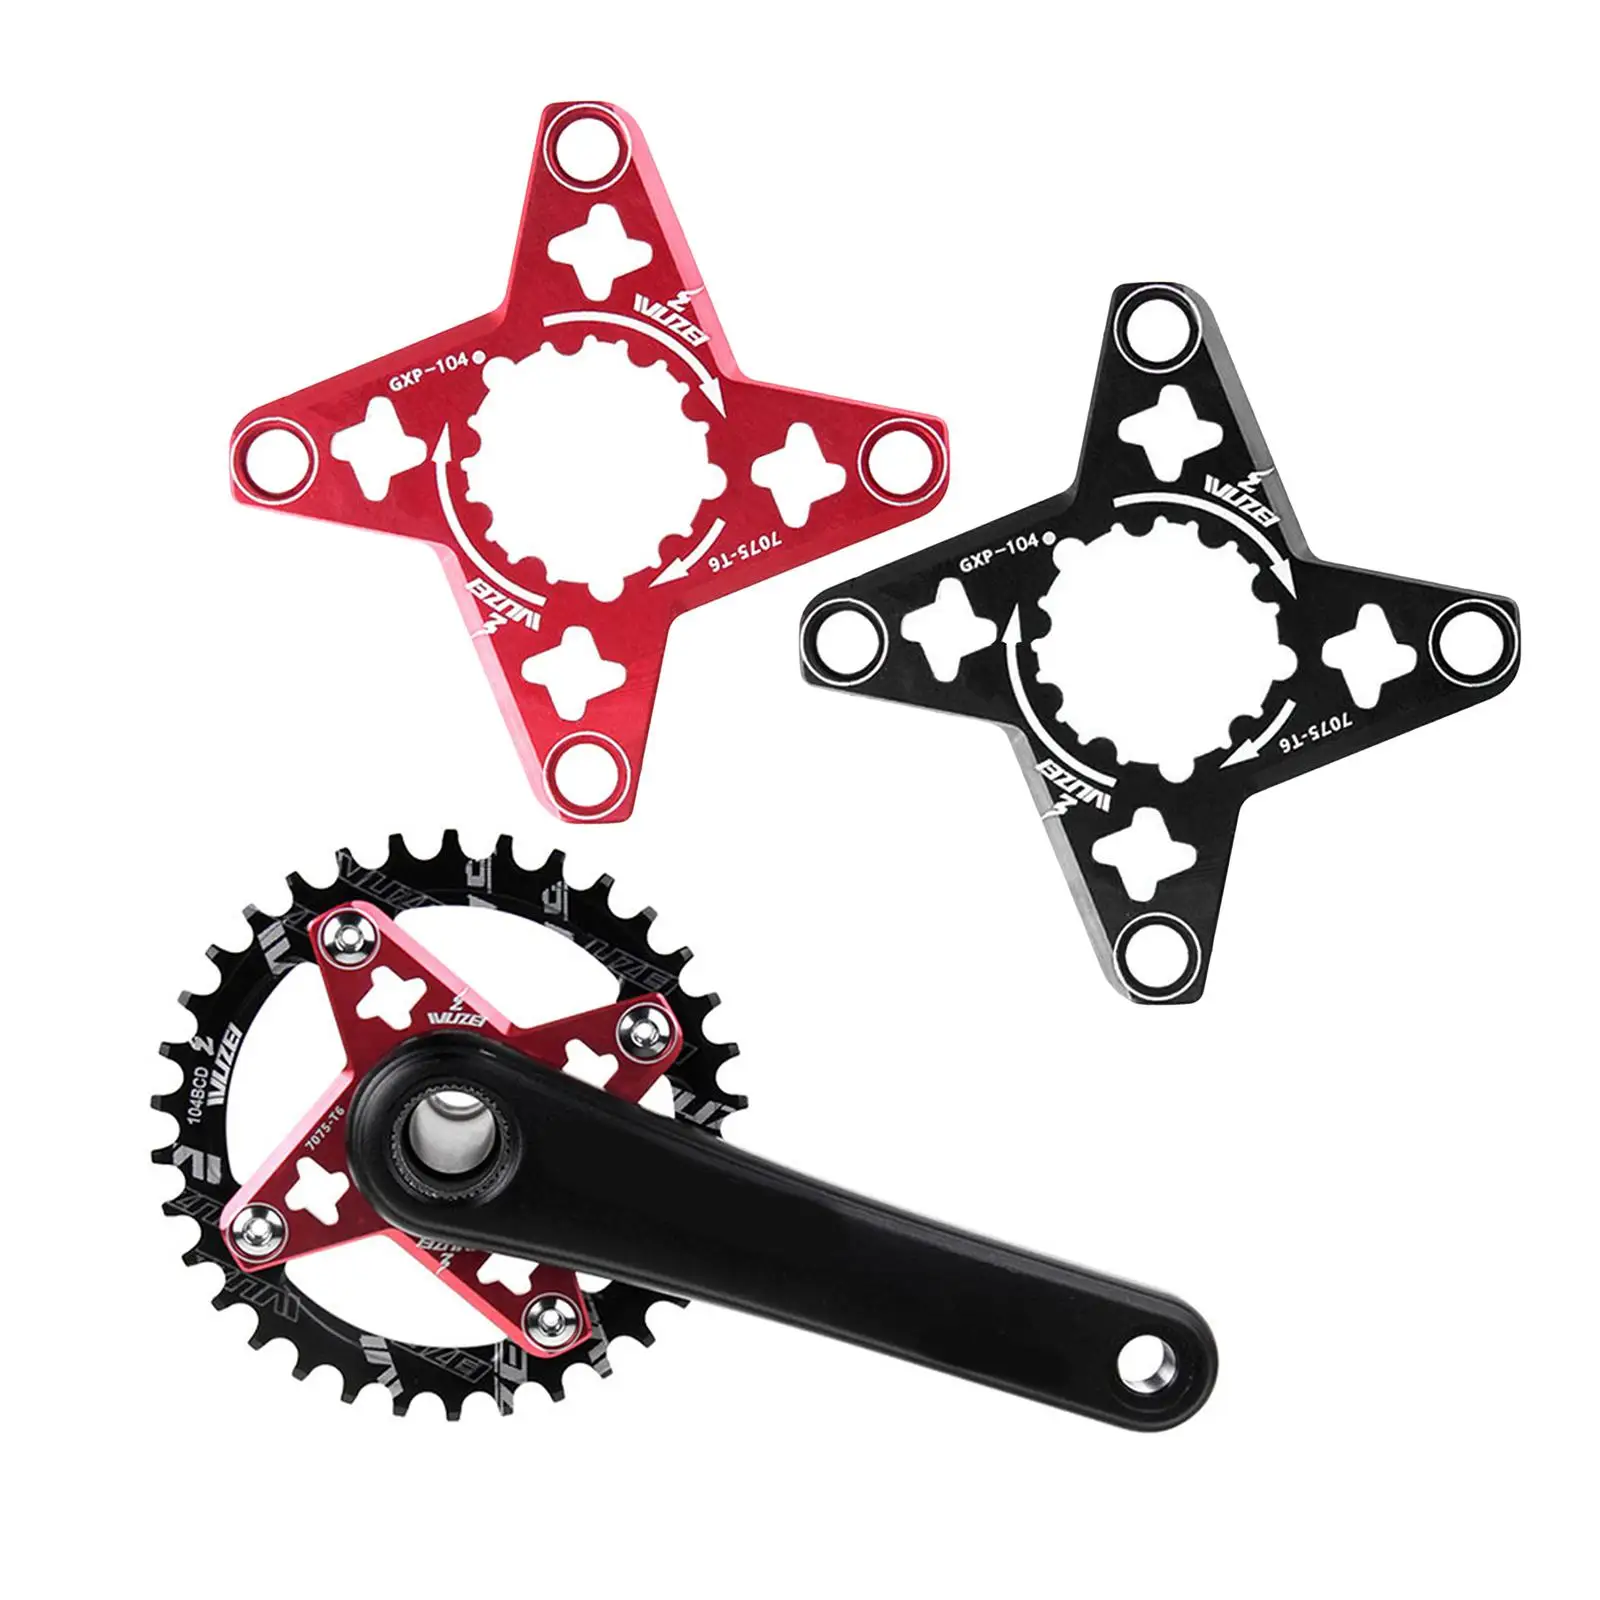 Mountain Bike Crank GXP to BCD 104mm Spider Adapter Converter Cycling Parts